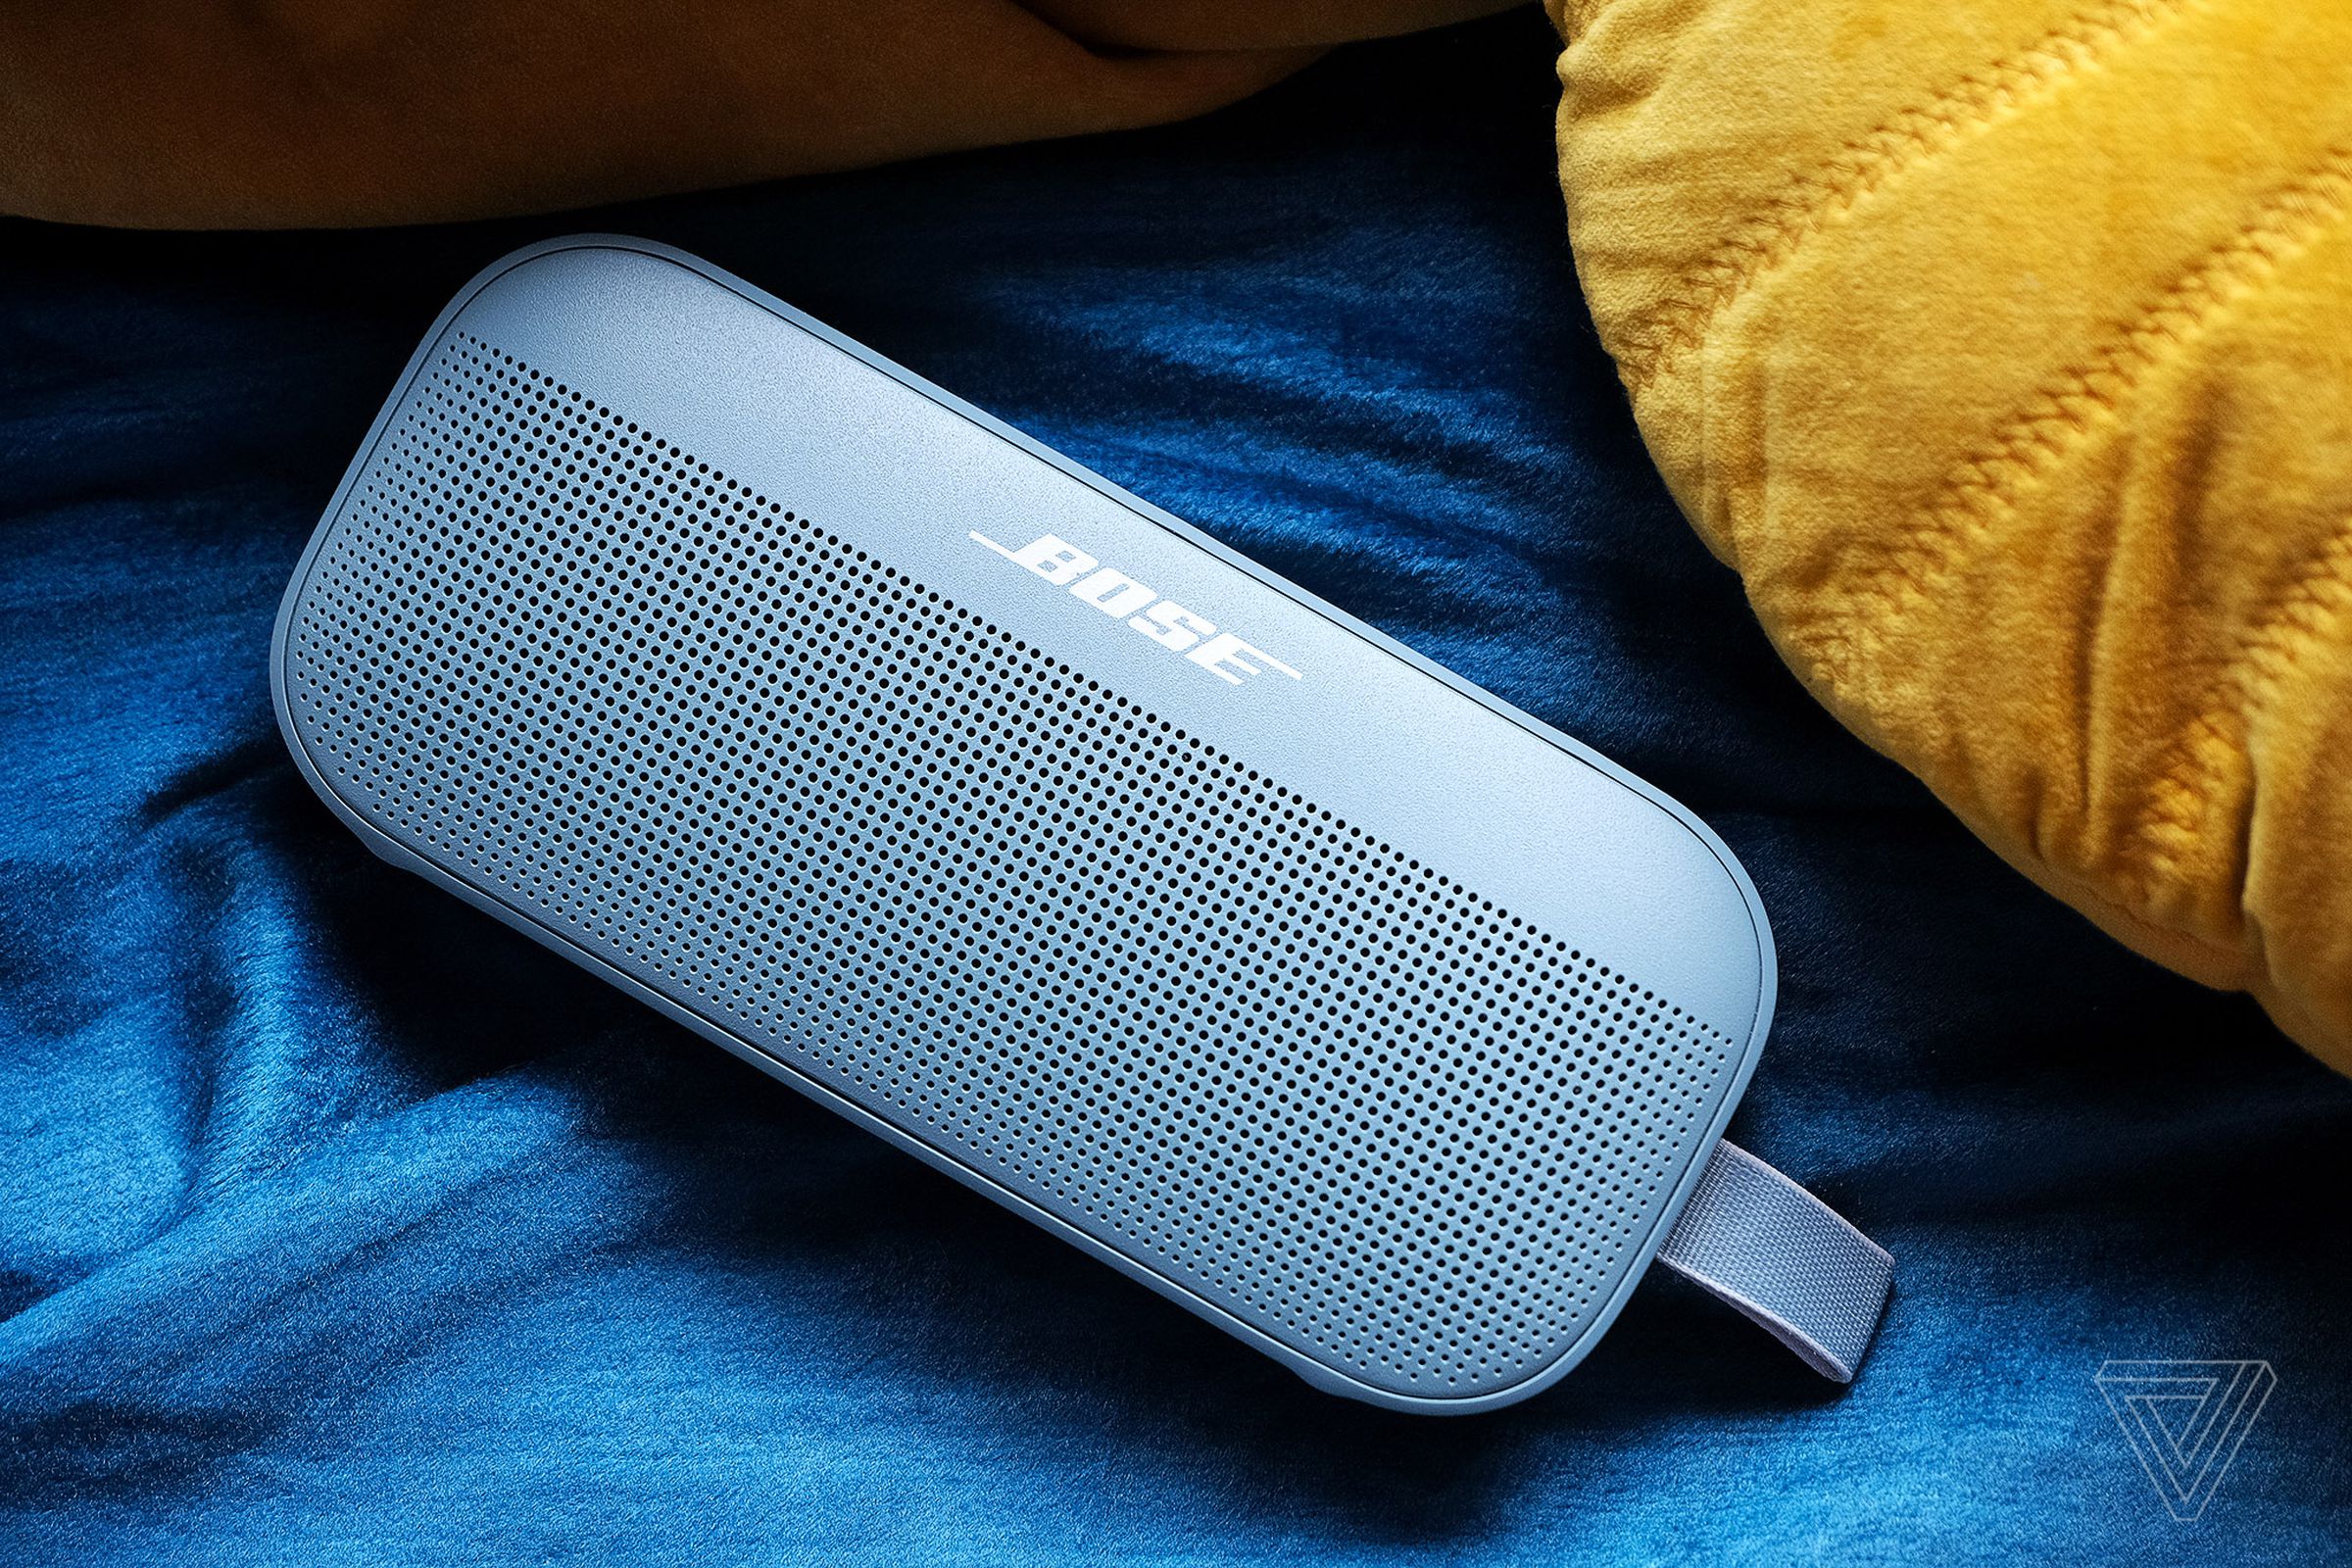 Bose’s SoundLink Flex is more rugged and durable than it looks.